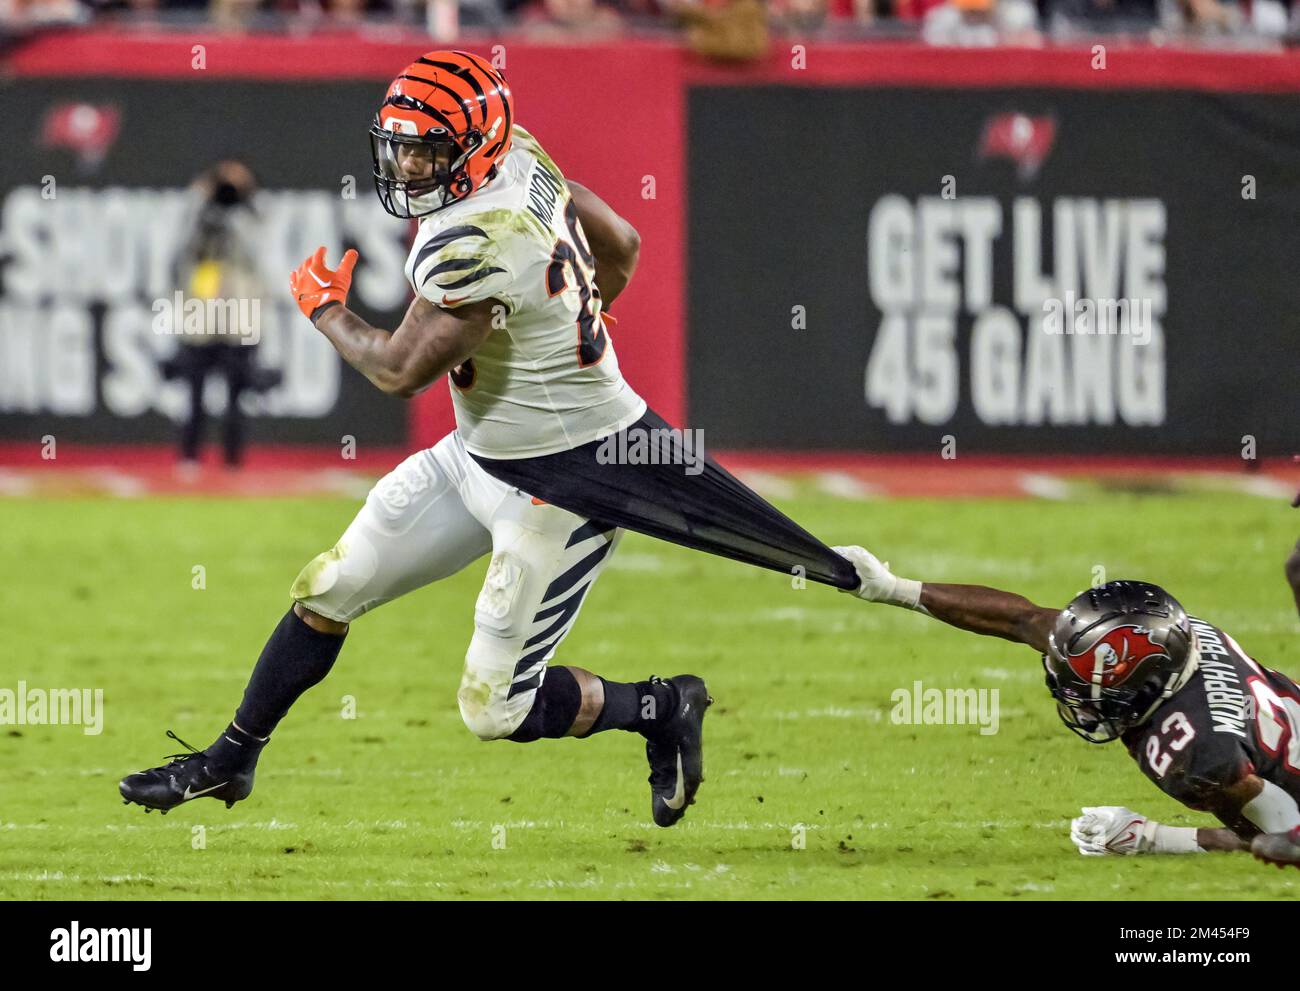 Tampa, United States. 18th Dec, 2022. Tampa Bay Buccaneers cornerback Sean Murphy-Bunting (23) hangs on to the shirt of Cincinnati Bengals running back Joe Mixon (28) for a tackle during the second half at Raymond James Stadium in Tampa, Florida on Sunday, December 18, 2022. Photo by Steve Nesius/UPI. Credit: UPI/Alamy Live News Stock Photo